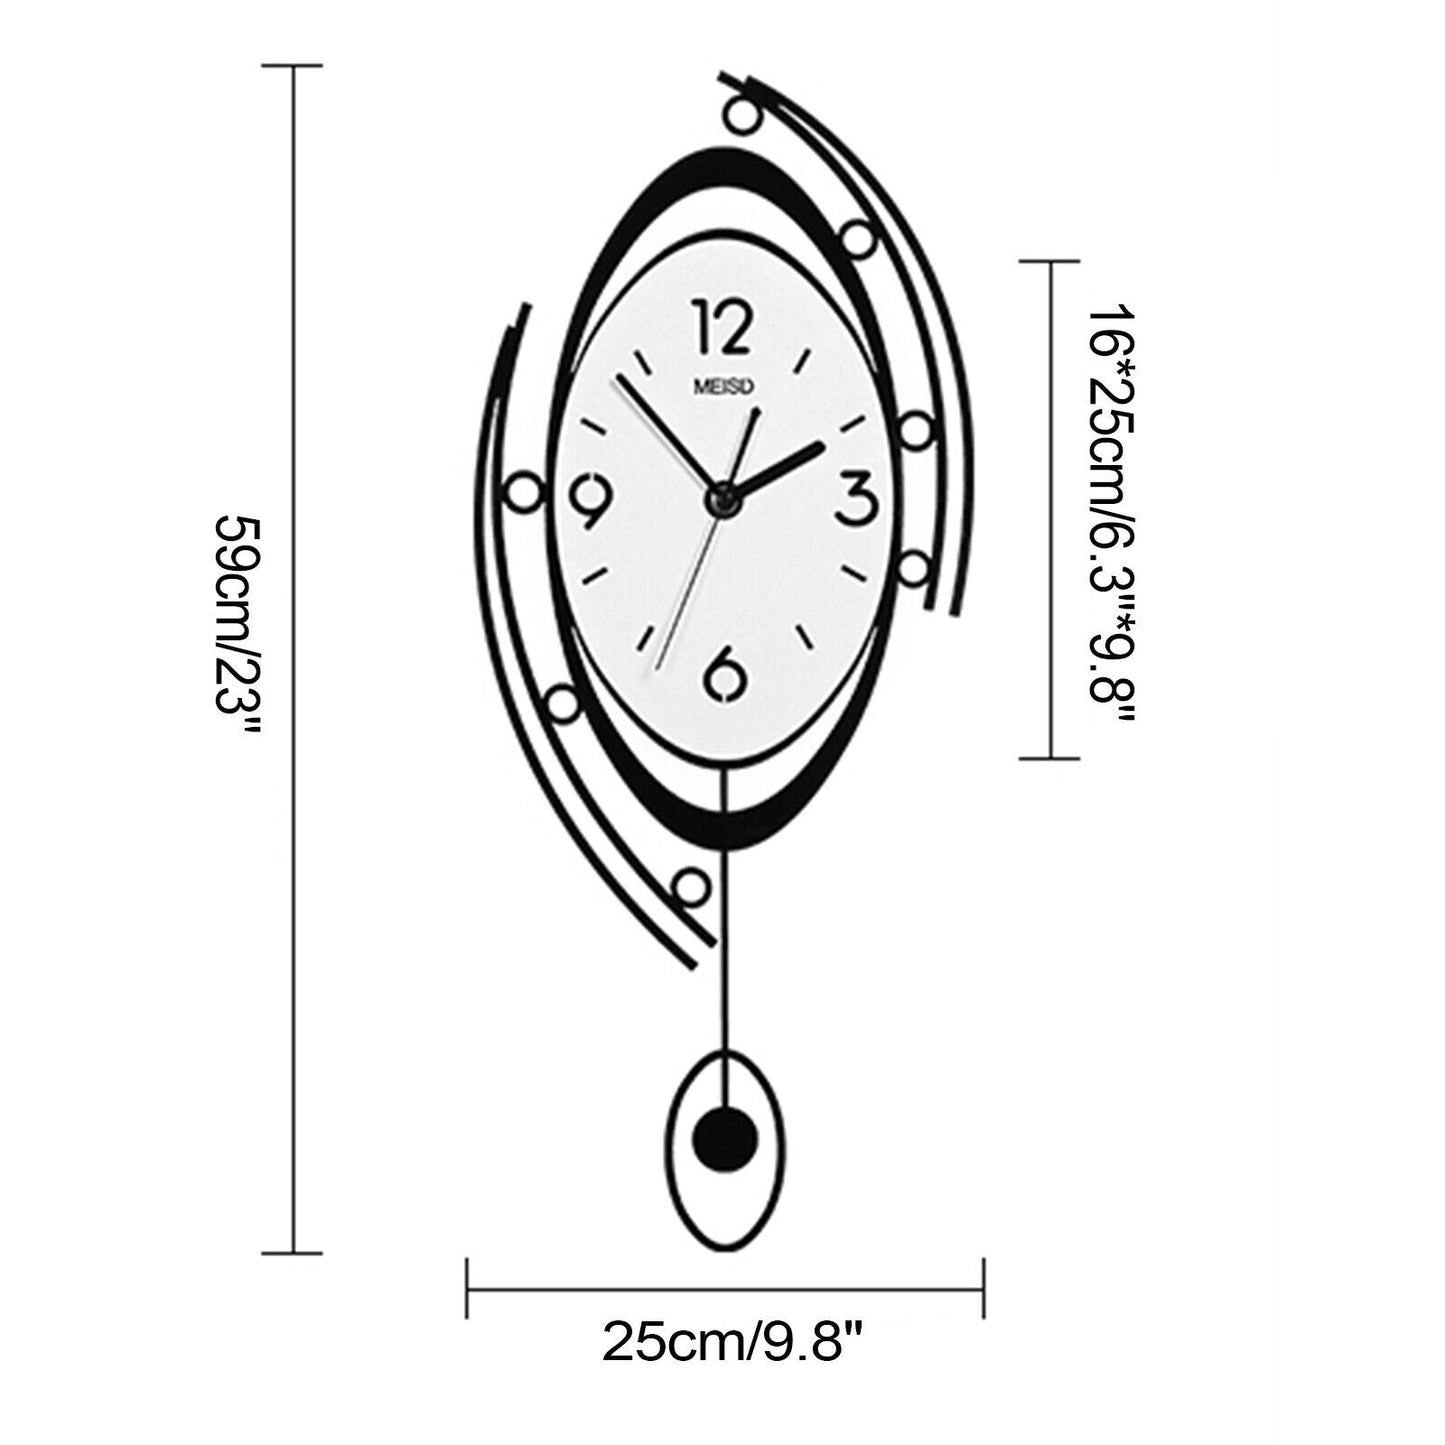 3D Wall Clock with Pendulum in Large